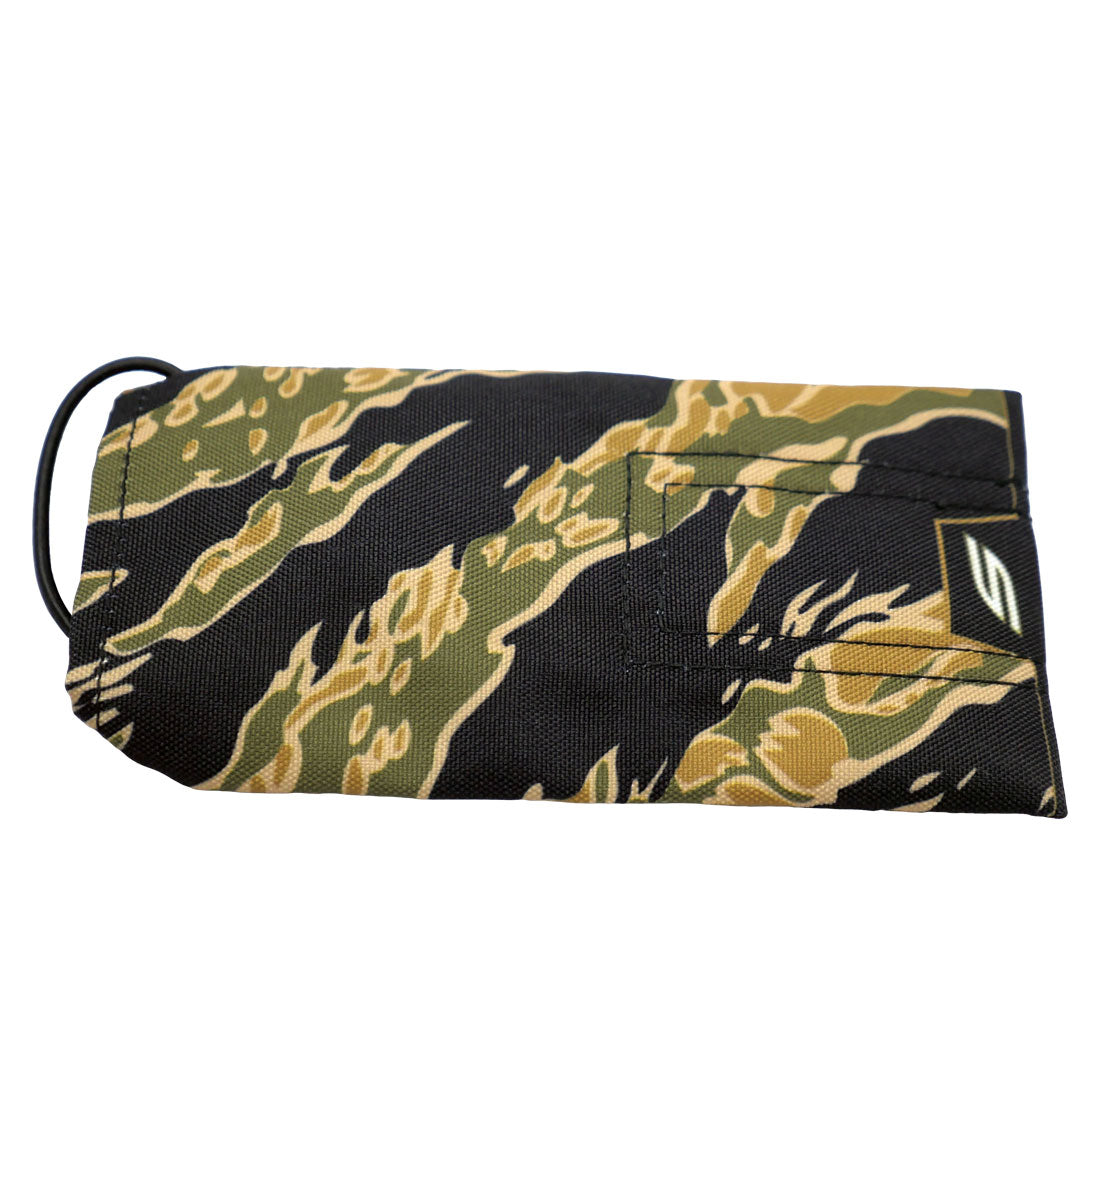 paintball Barrel Cover